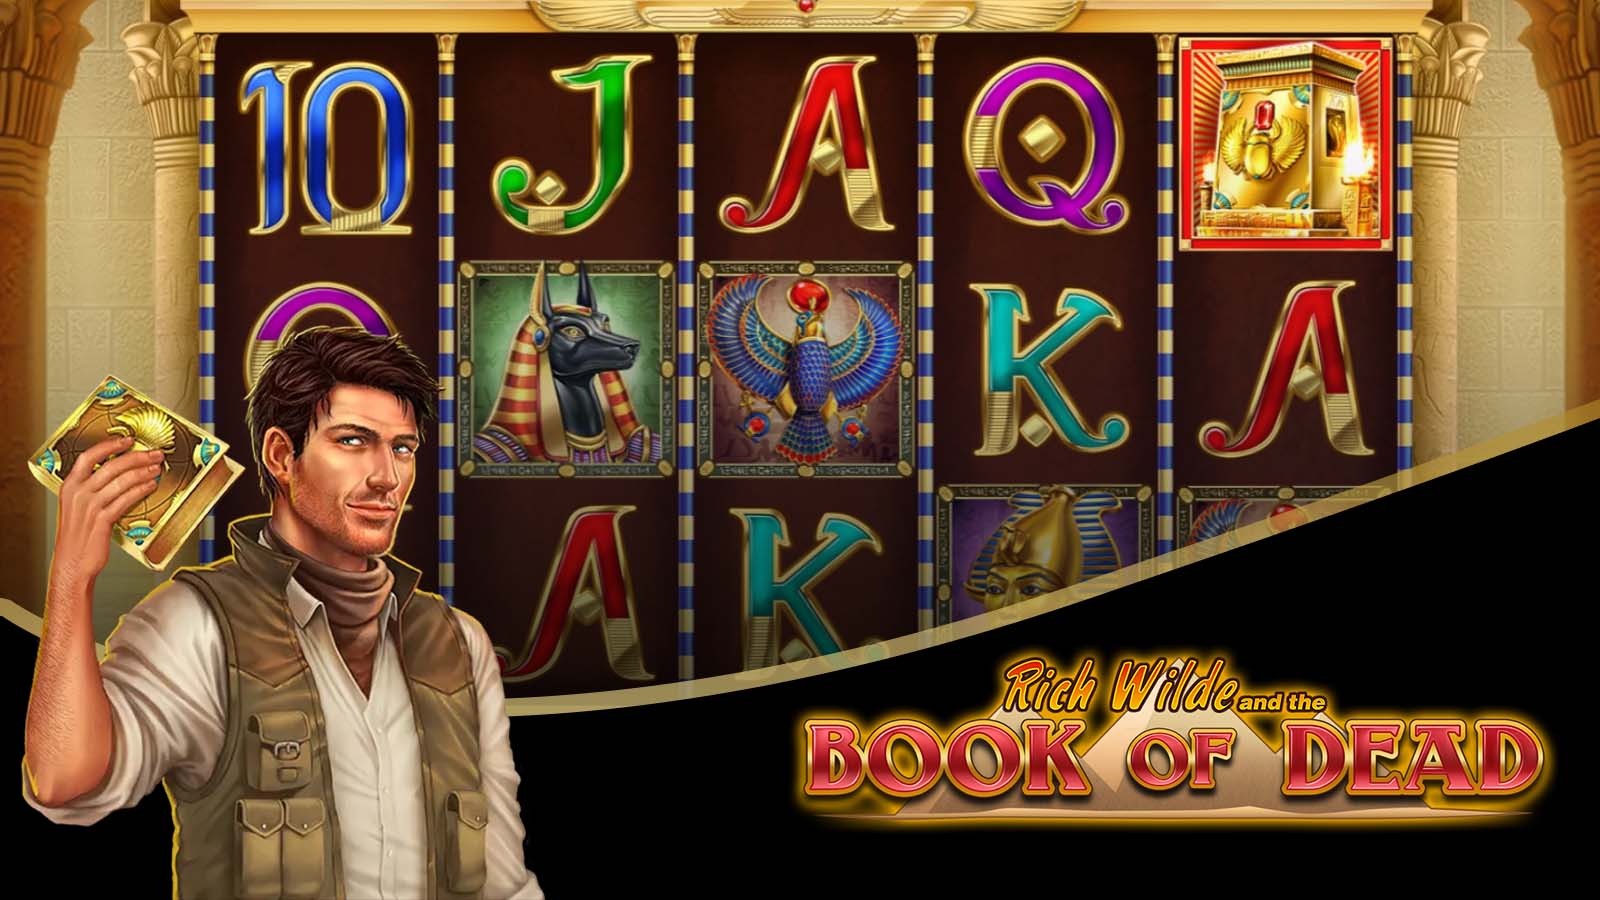 CasinoAlpha’s Recommendation Play With Book of Dead Free Spins